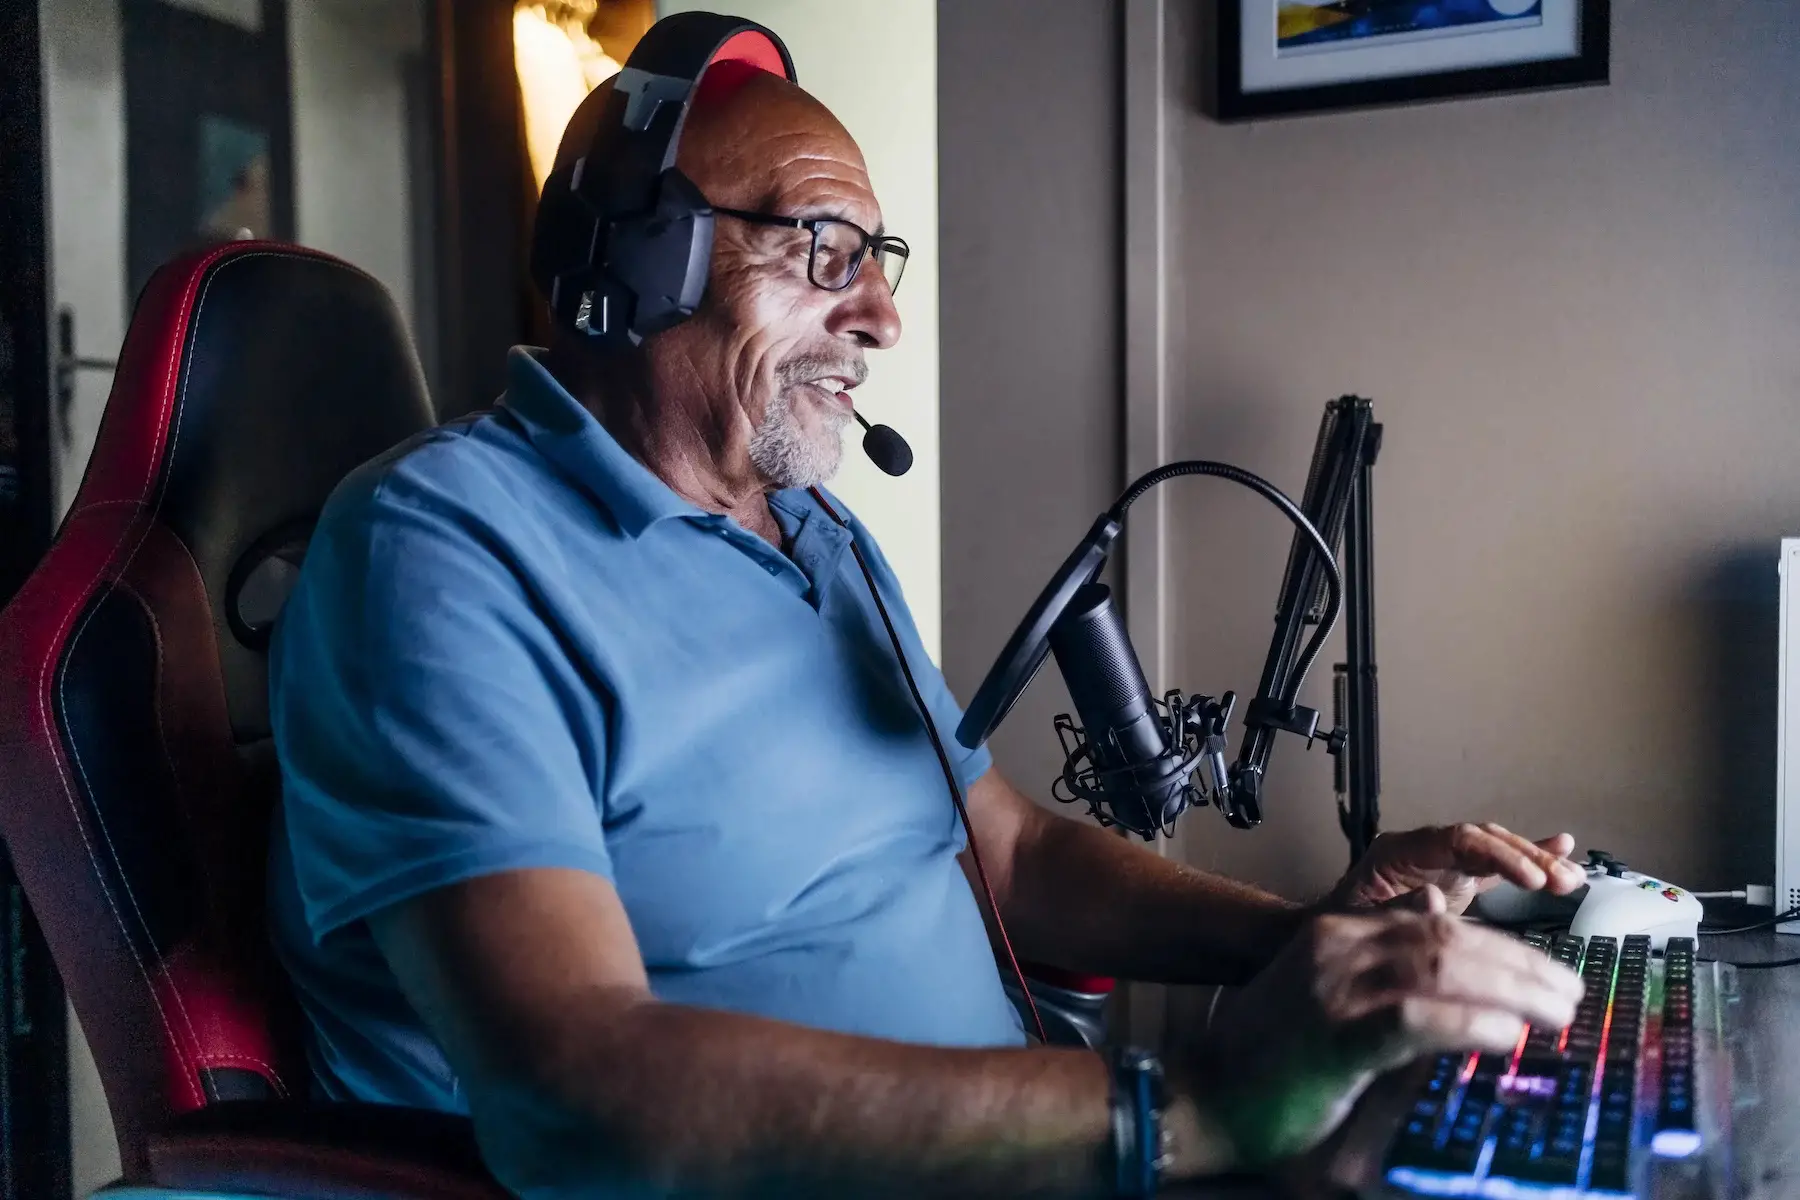 A middle-aged man sits at his gaming computer